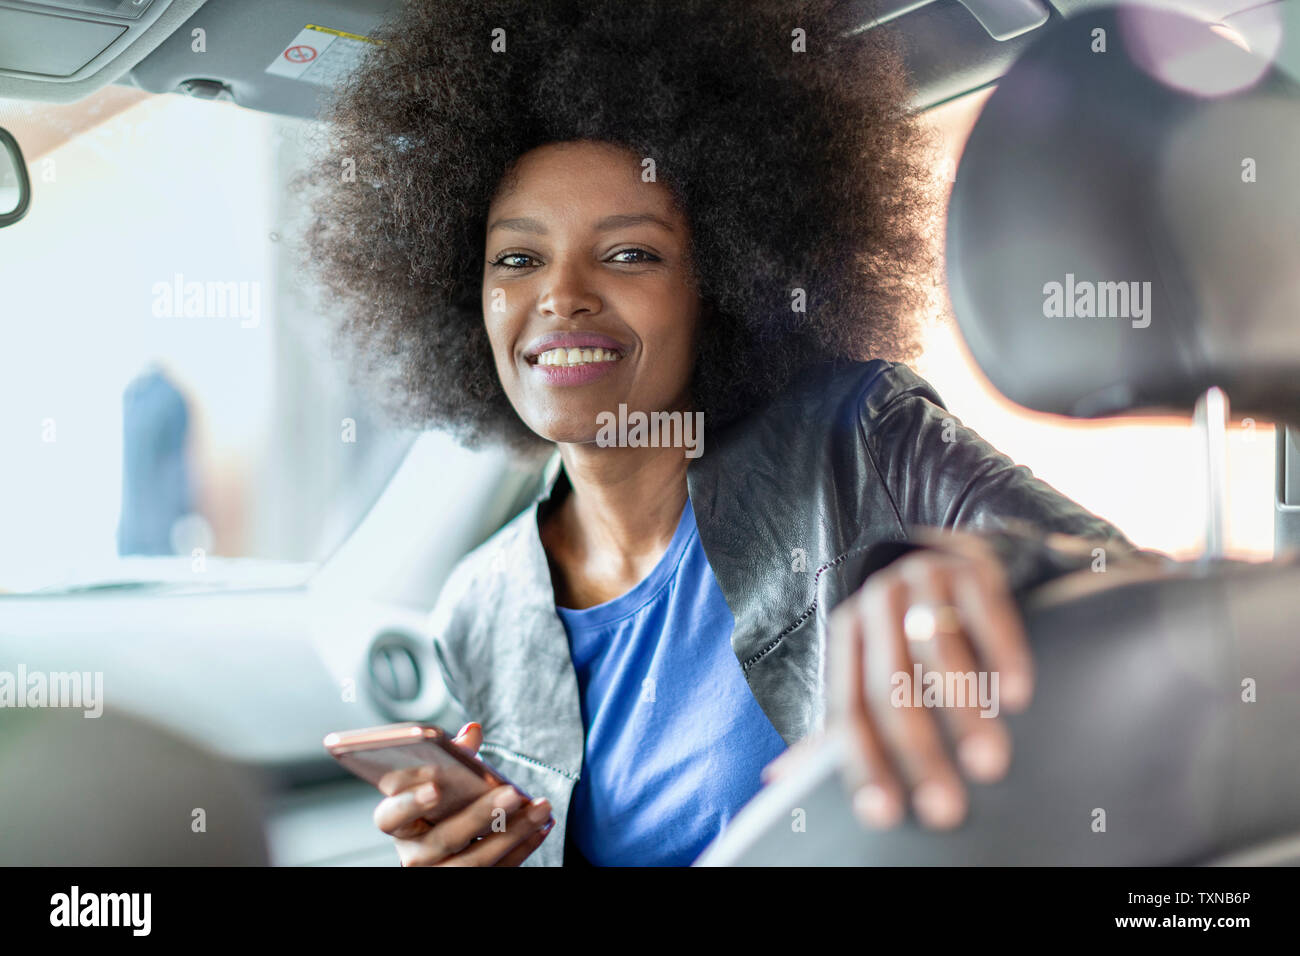 Happy young woman with afro hair in car passenger seat holding smartphone, portrait Stock Photo